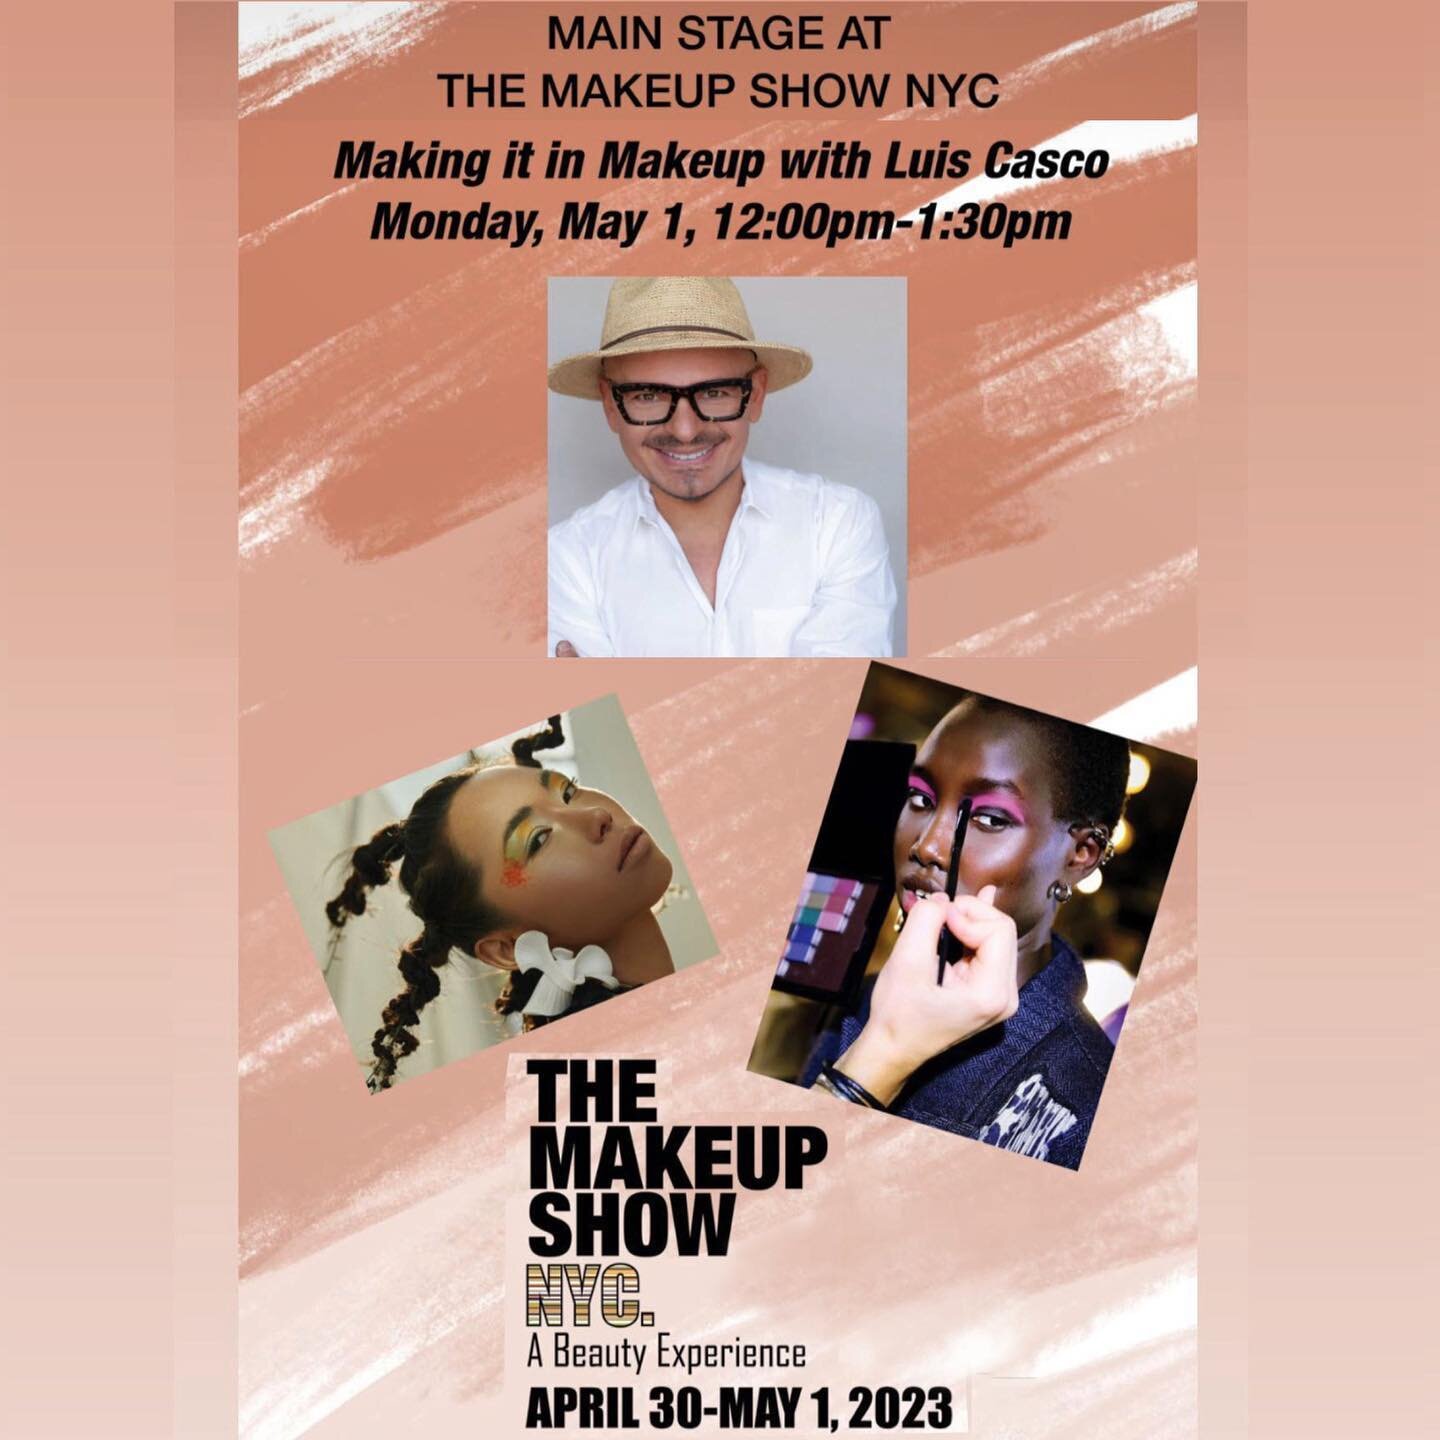 ✨Come join me next week in NYC @themakeupshow Main Stage @metropavilion ✨ &ldquo;Making it in Makeup&rdquo; with #luiscasco #luiscascomakeup 
Monday, May 1, 12:00pm-1:30pm

In our competitive beauty business talent, drive and tenacity are essential t